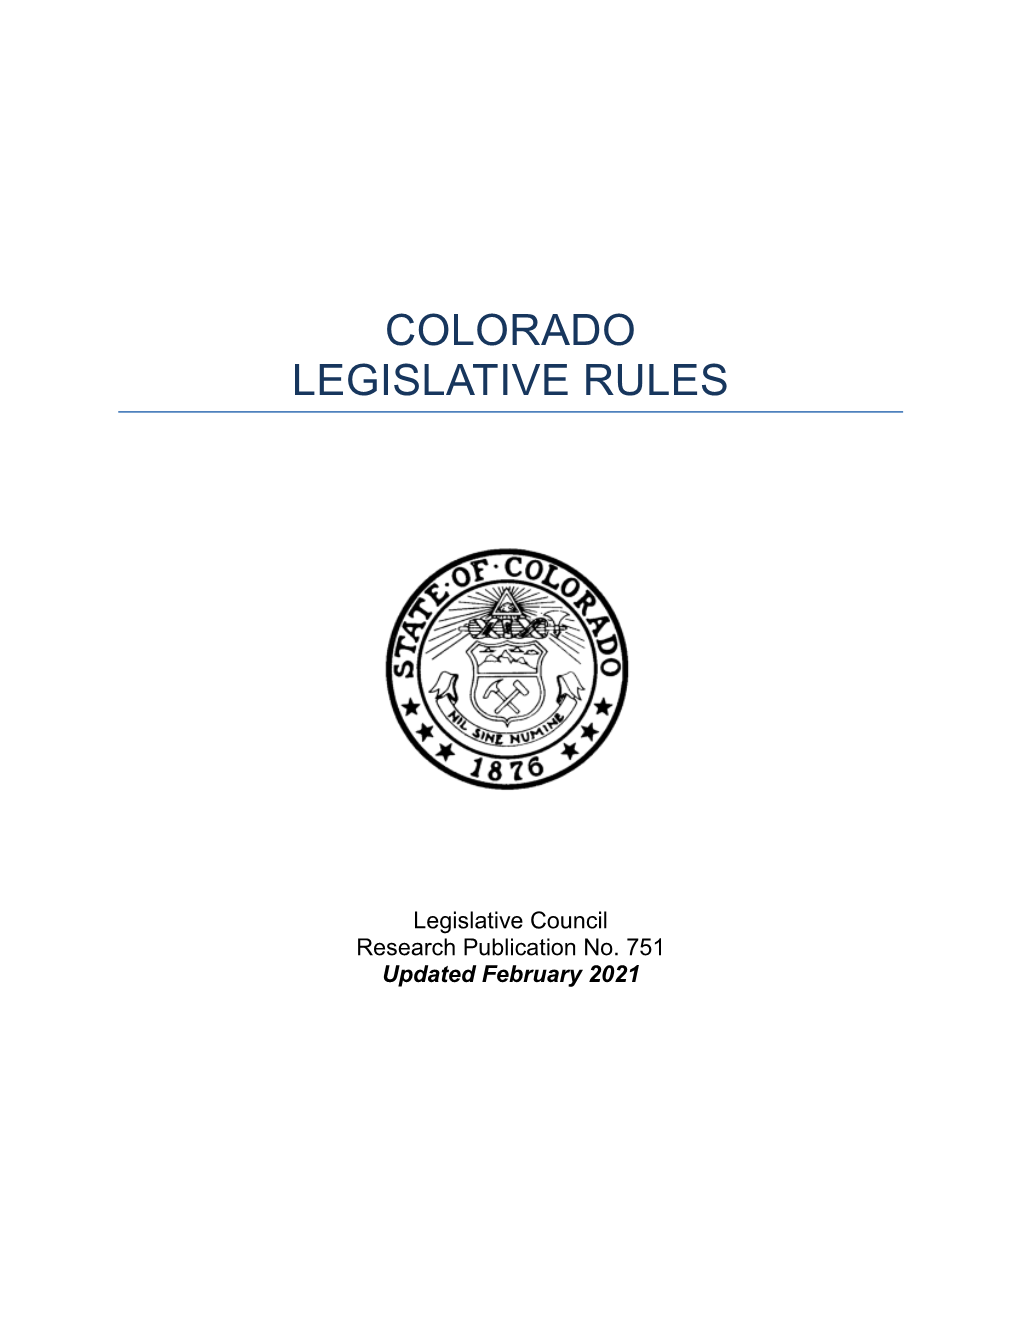 Rules of the House of Representatives; Rules of the Senate; Joint Rules of the Senate and House and Joint Session Rules; and Colorado Constitution